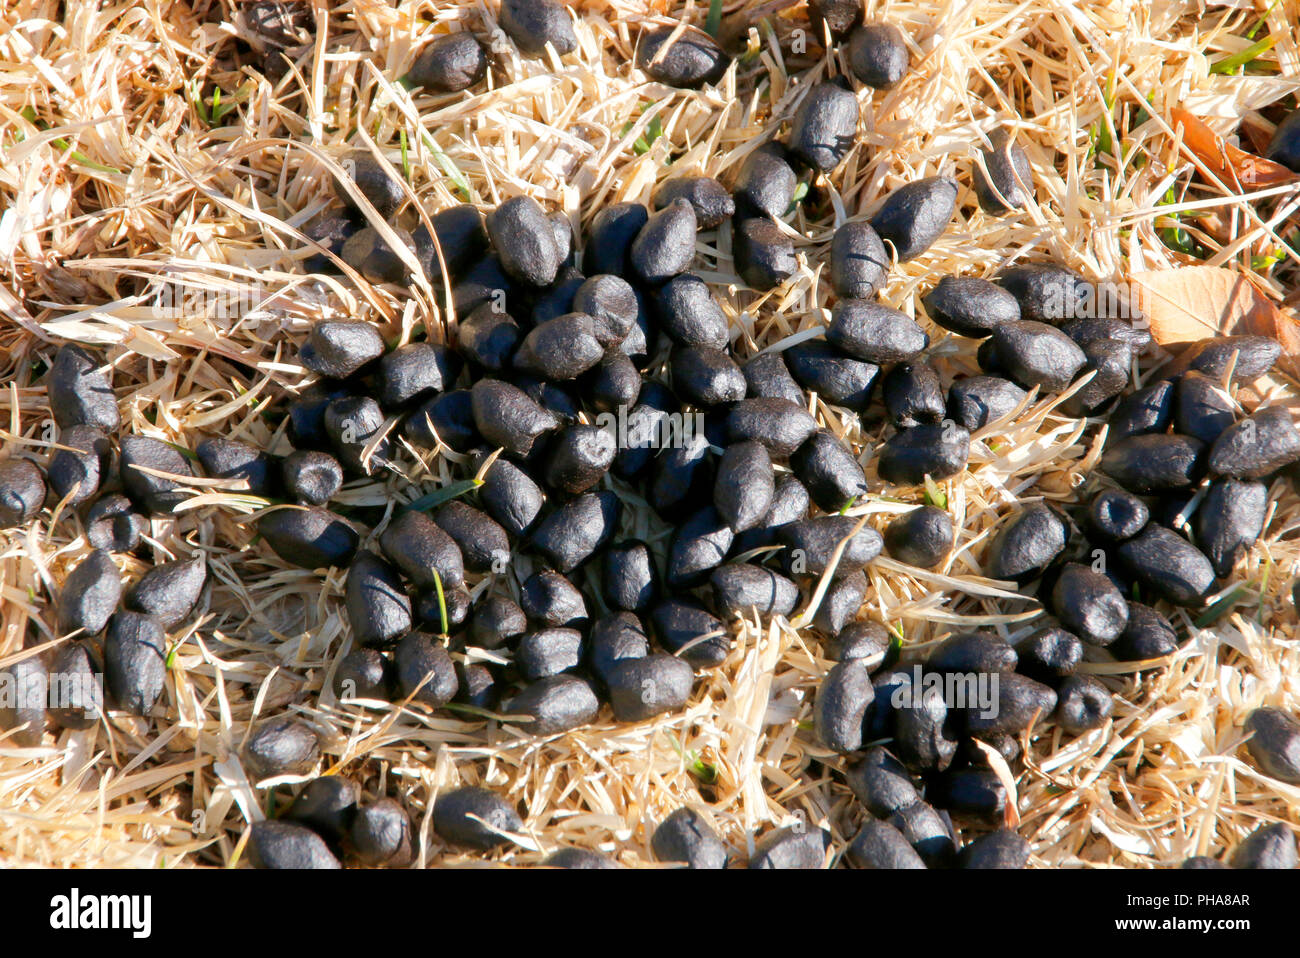 A pile of round black buck droppings on a dry grass background Stock Photo